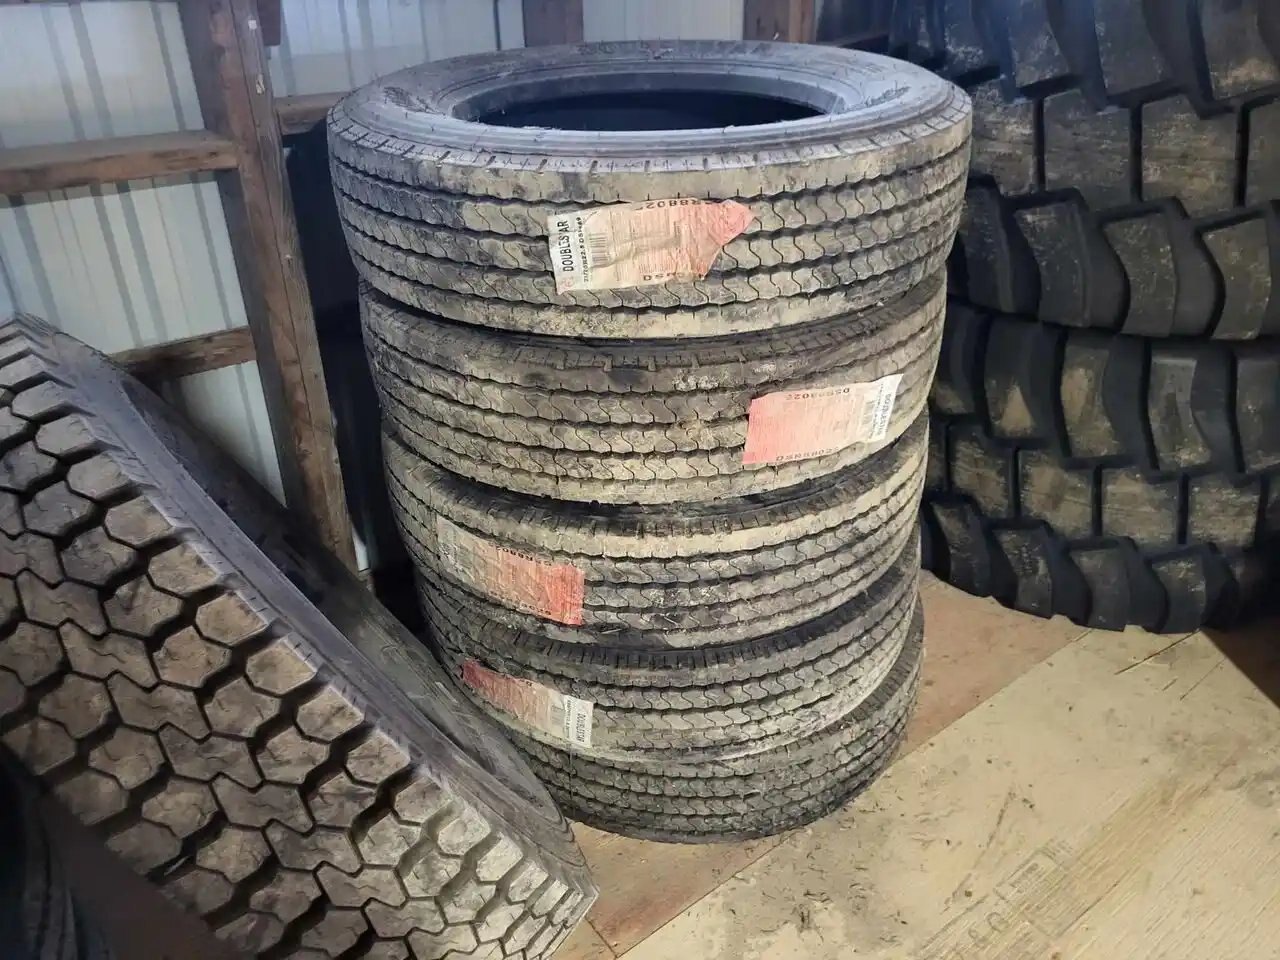 0 ***MANUFACTURER NOT SPECIFIED*** 255/70R22.5